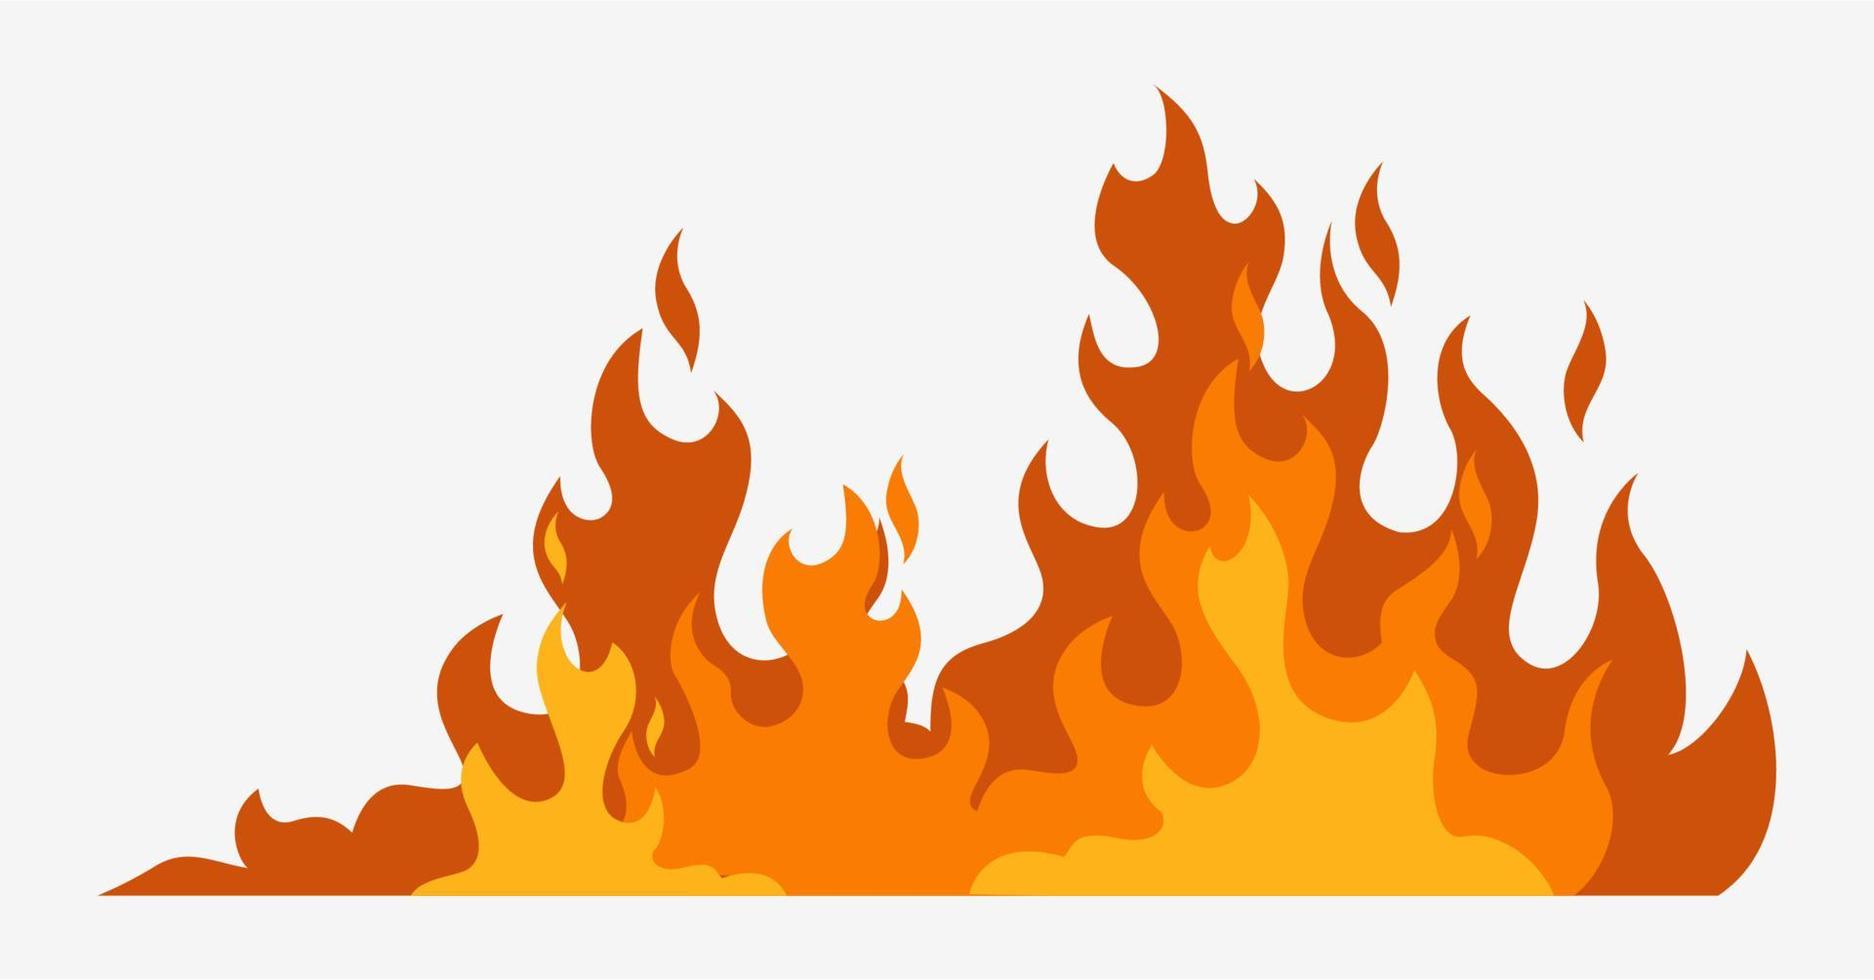 Fire background. Hot red line of fire danger of energy outbreak flammable light of forest flame realistic plasma vector flash bright element of incendiary magic.